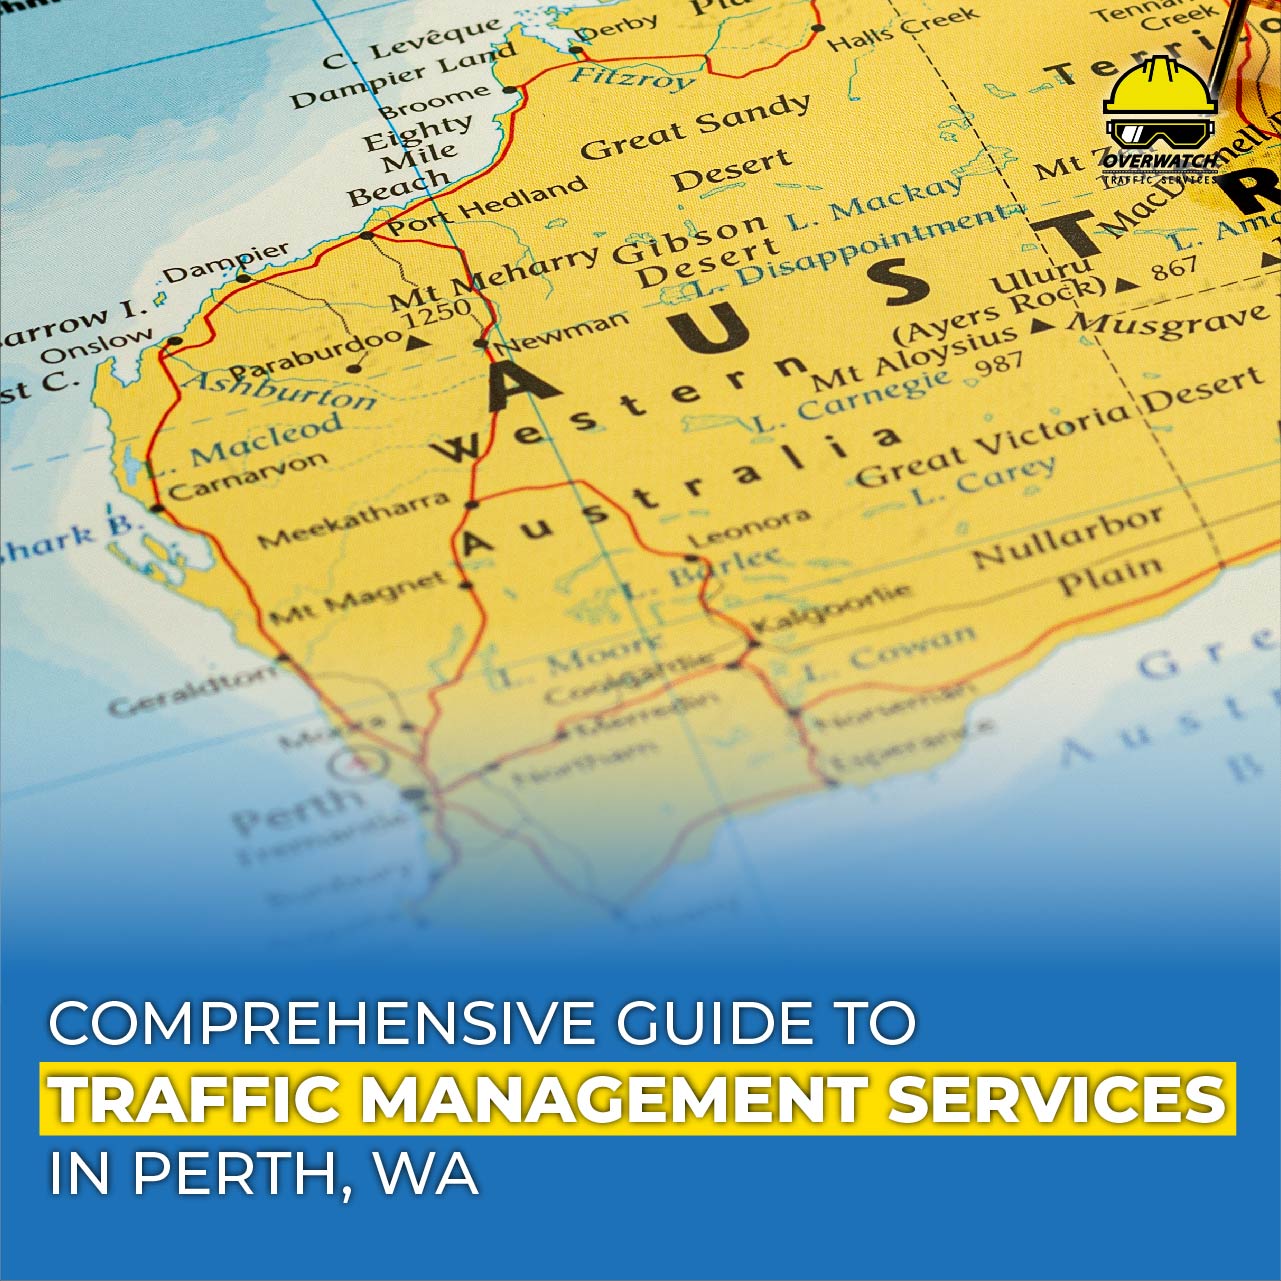 Comprehensive guide to traffic management services in Perth, WA